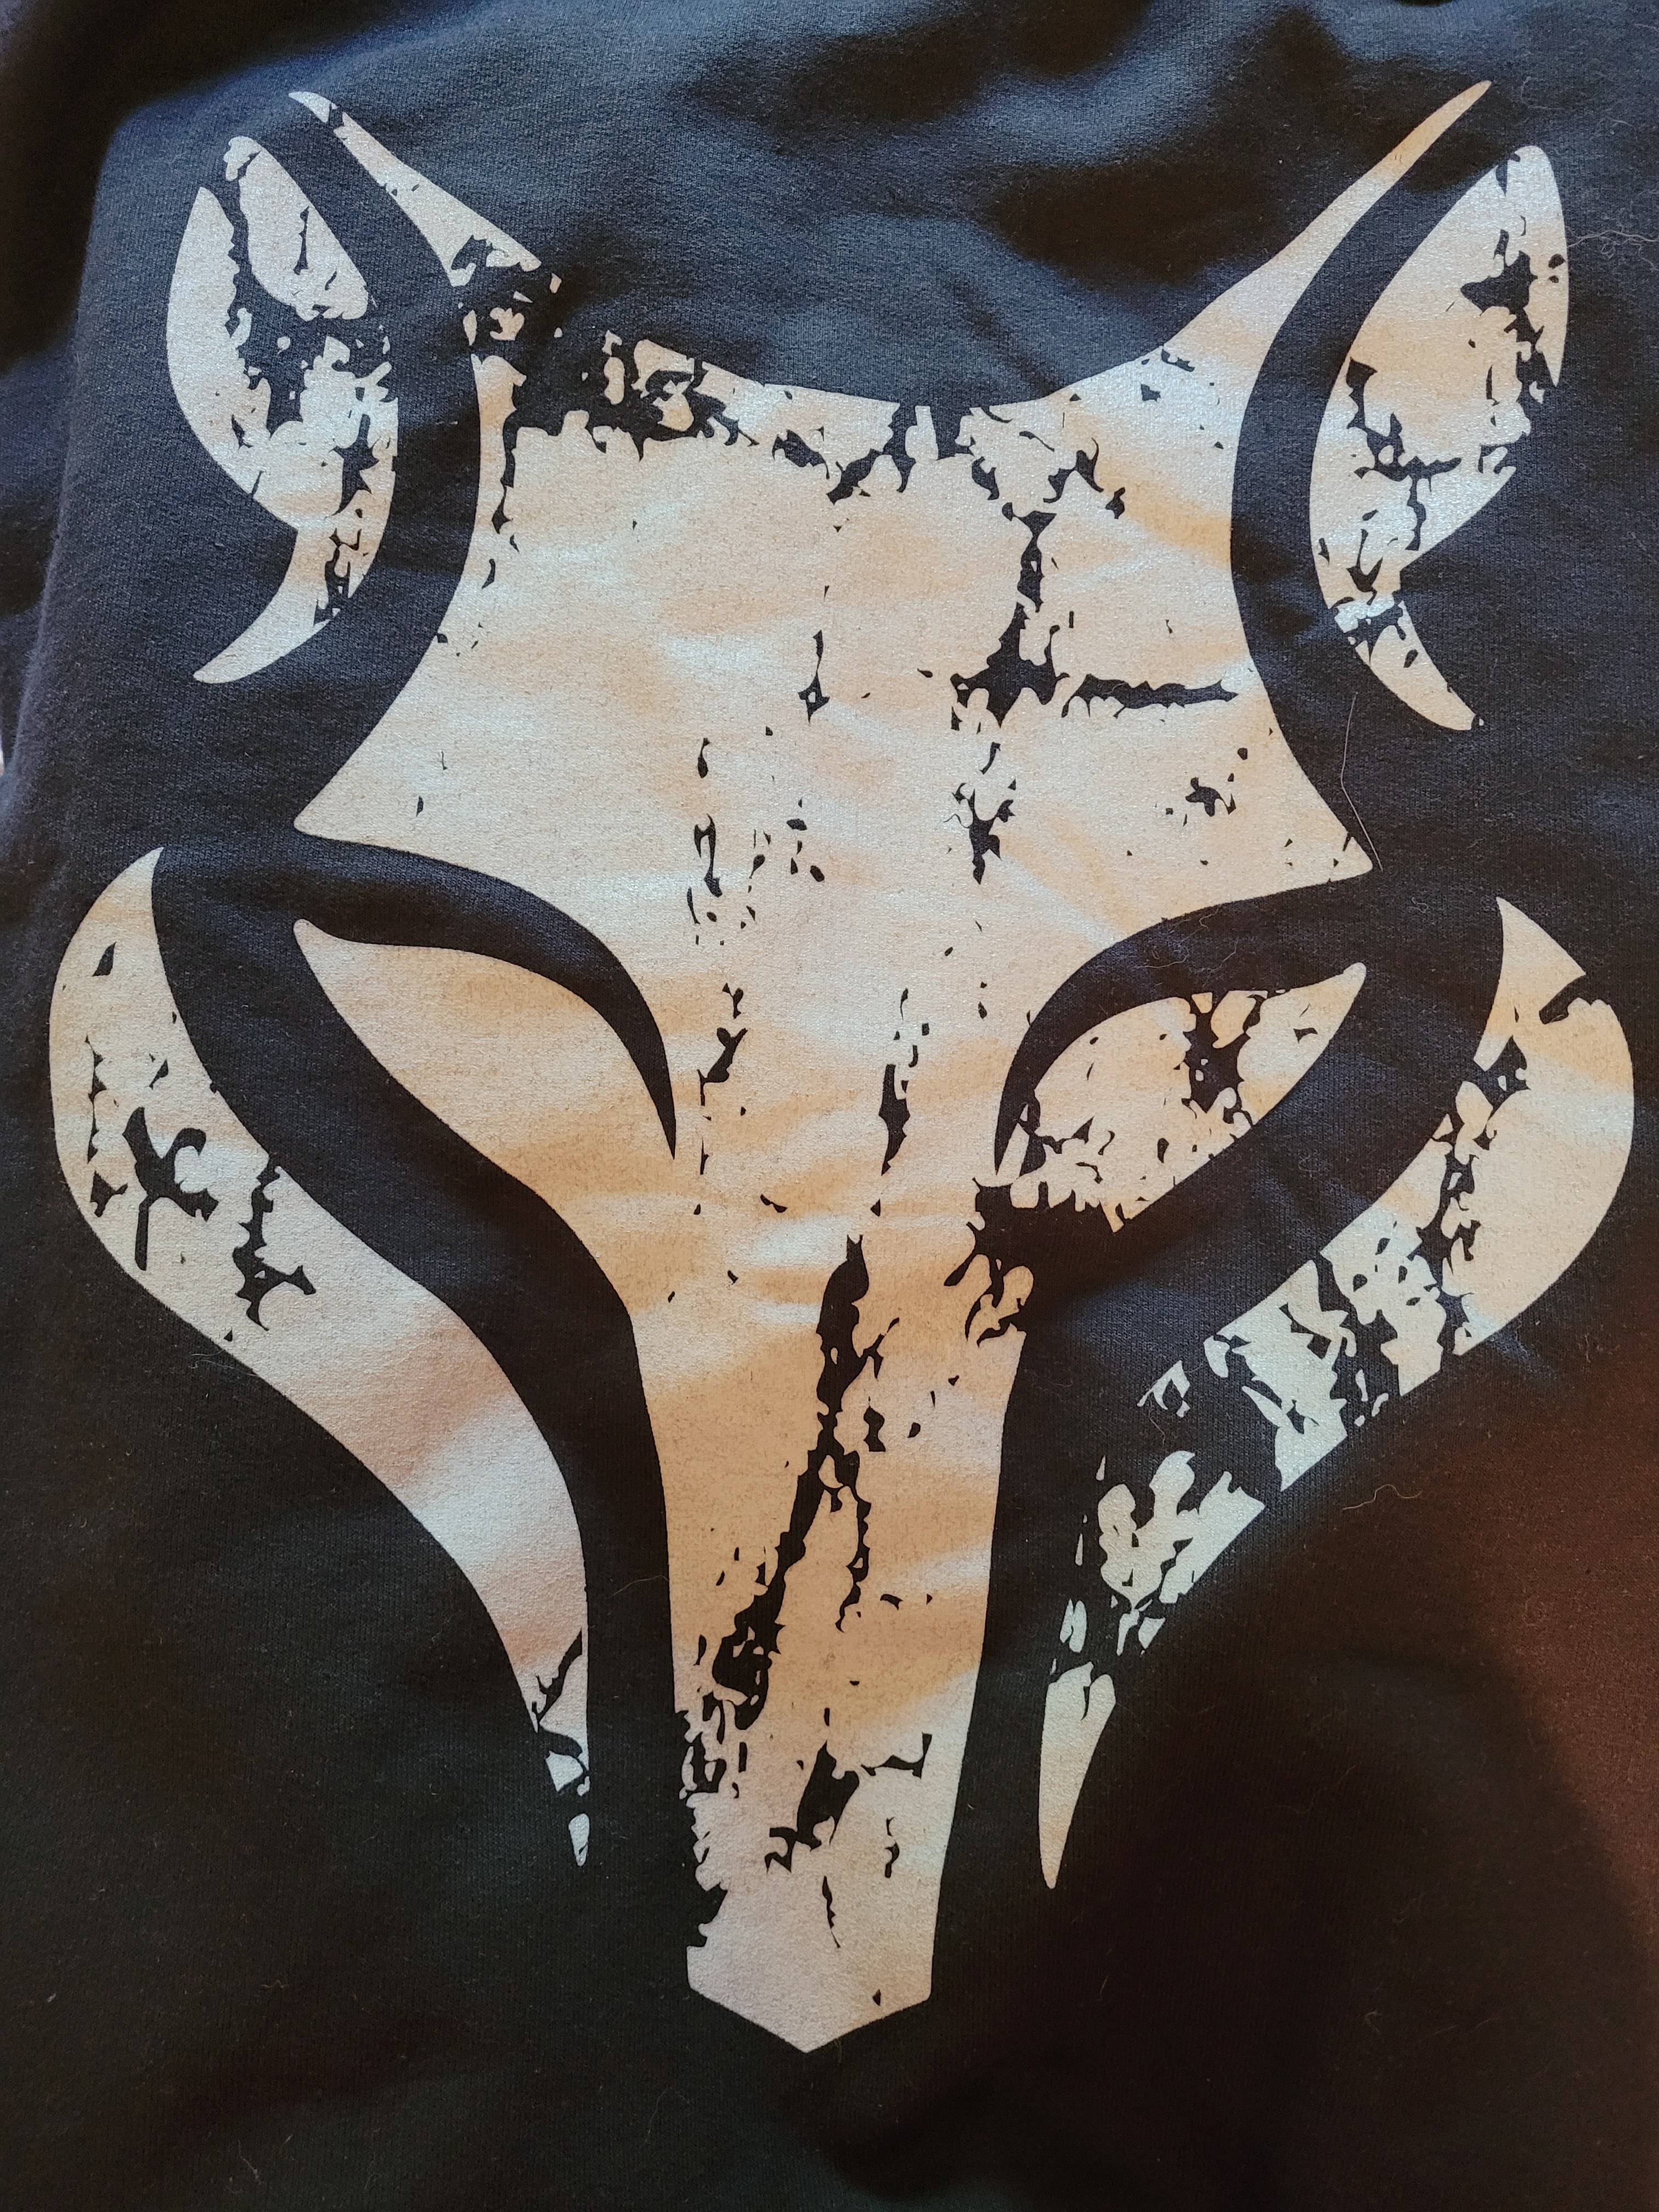 Hoodie graphic: Highly stylized illustration of a wolfs head